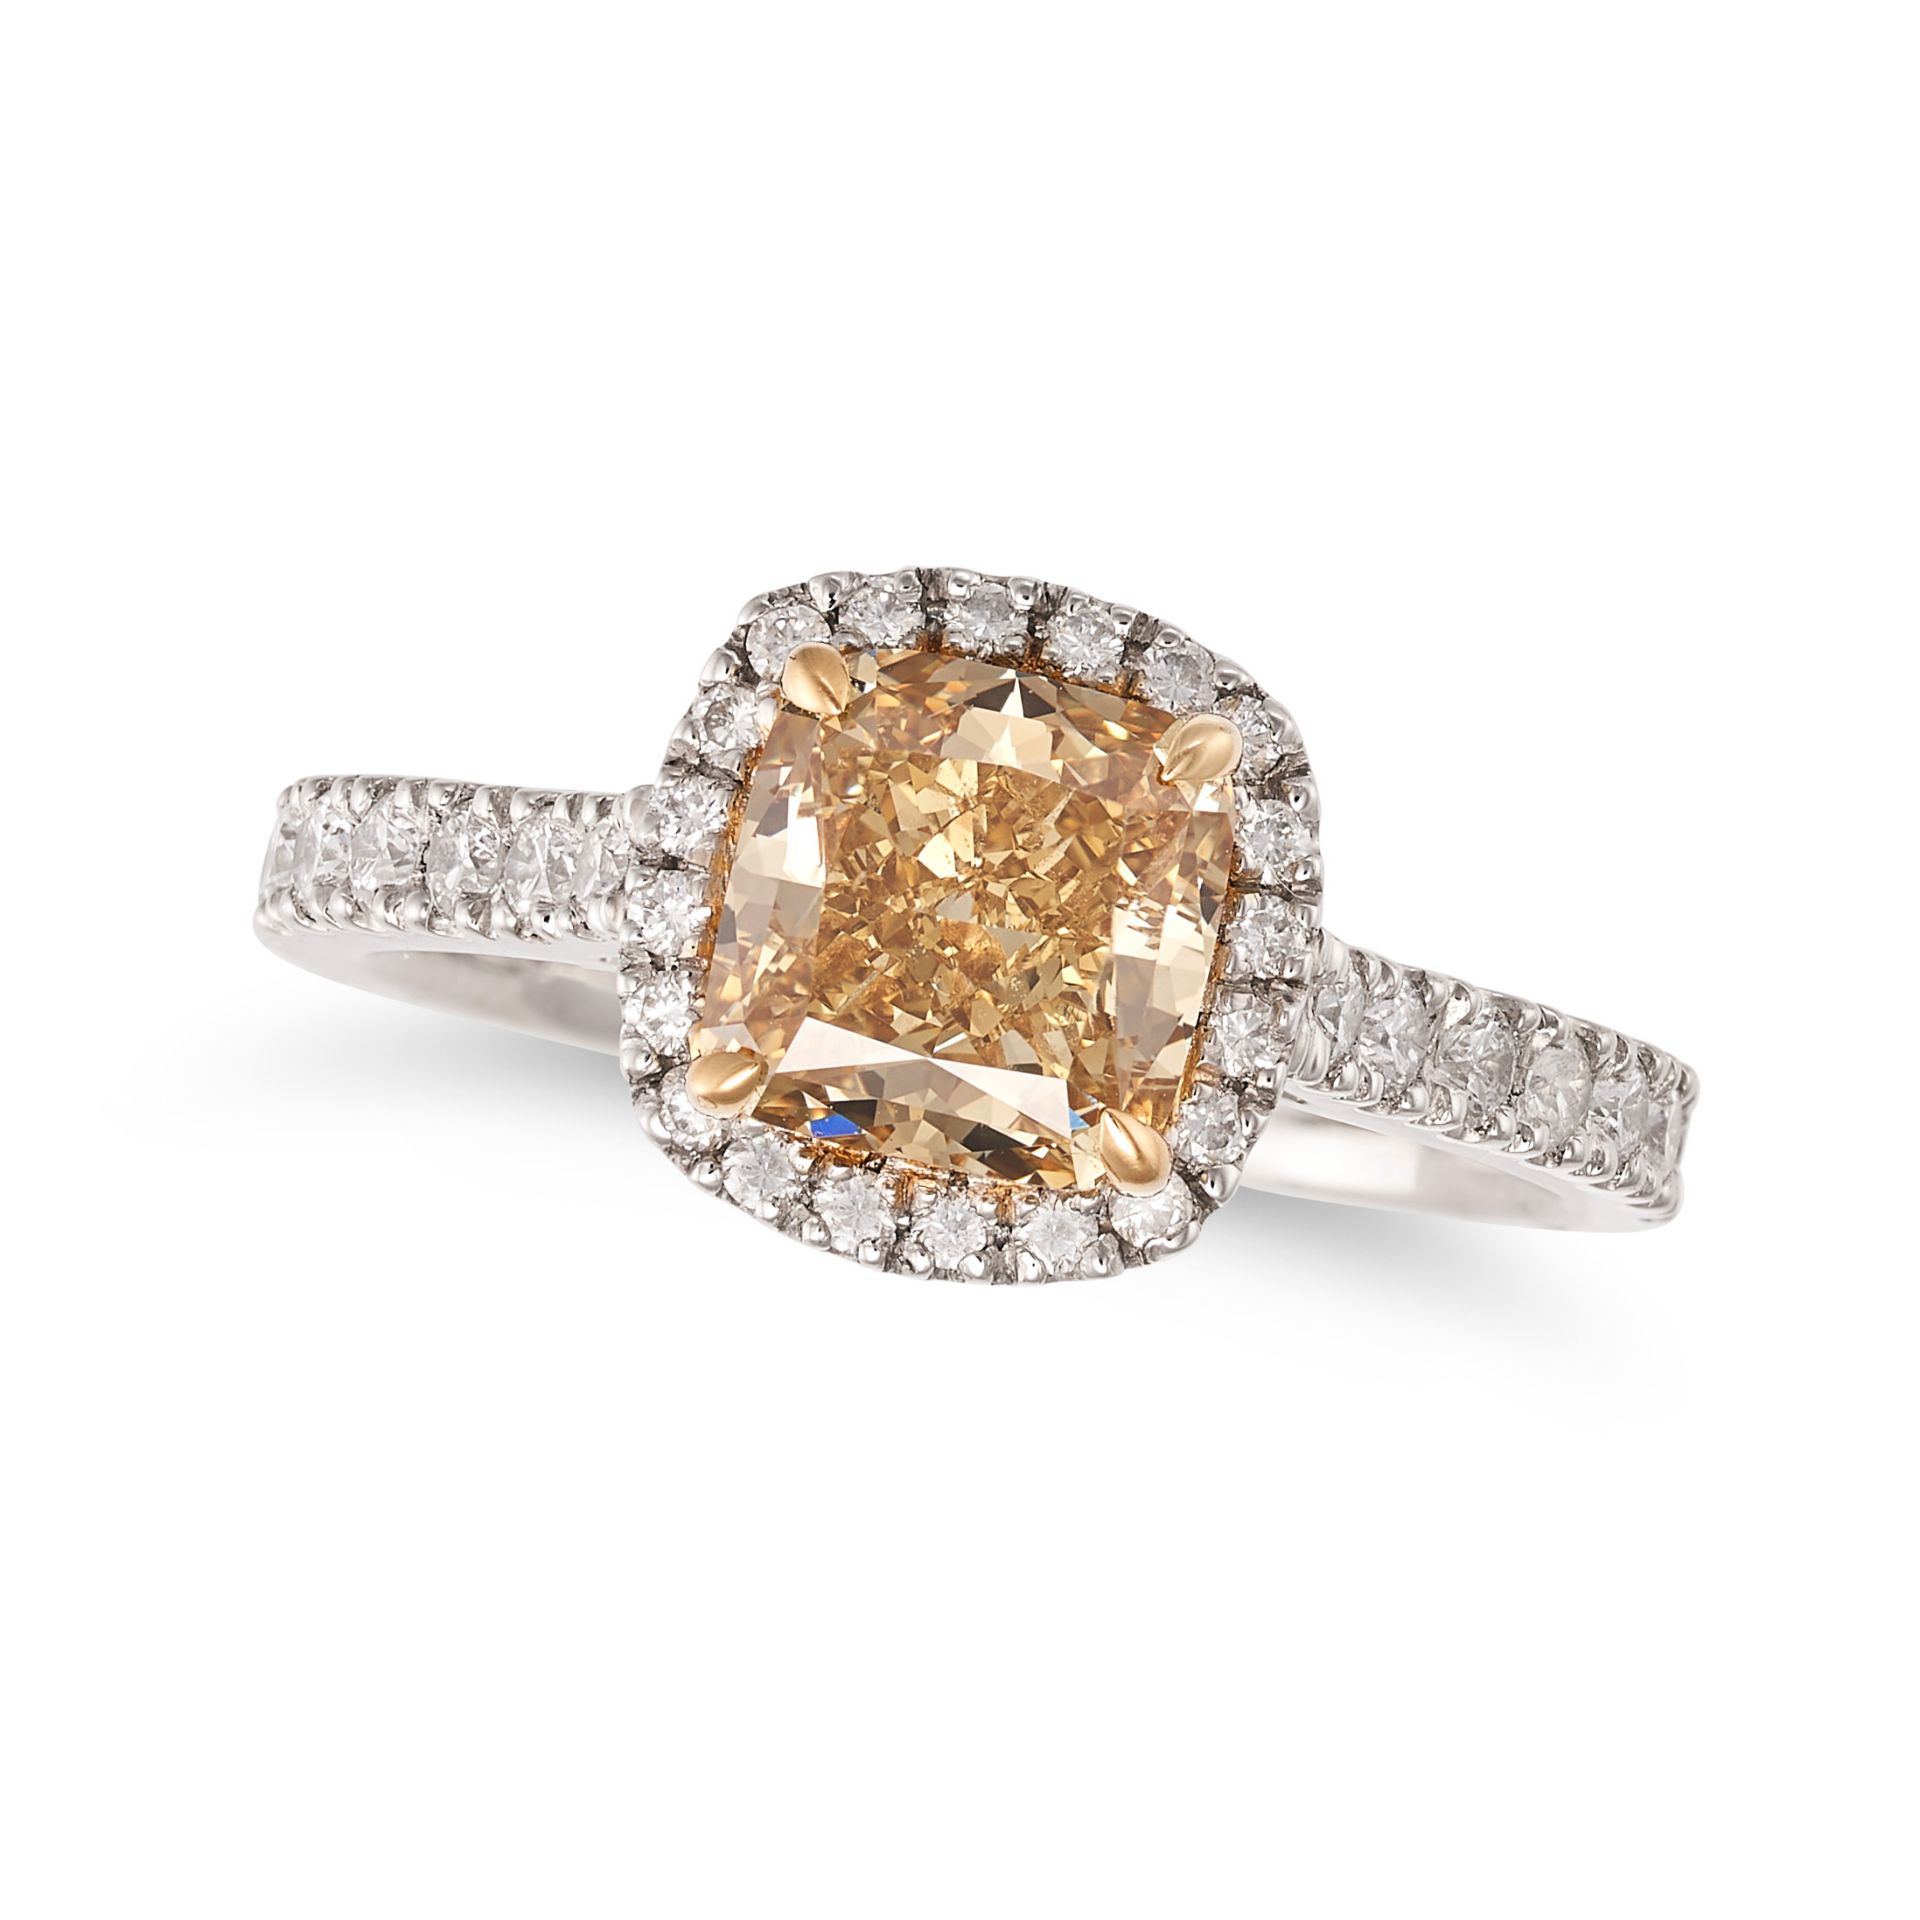 A YELLOW DIAMOND DRESS RING in platinum, set with a cushion cut yellow diamond of 1.90 carats in ...